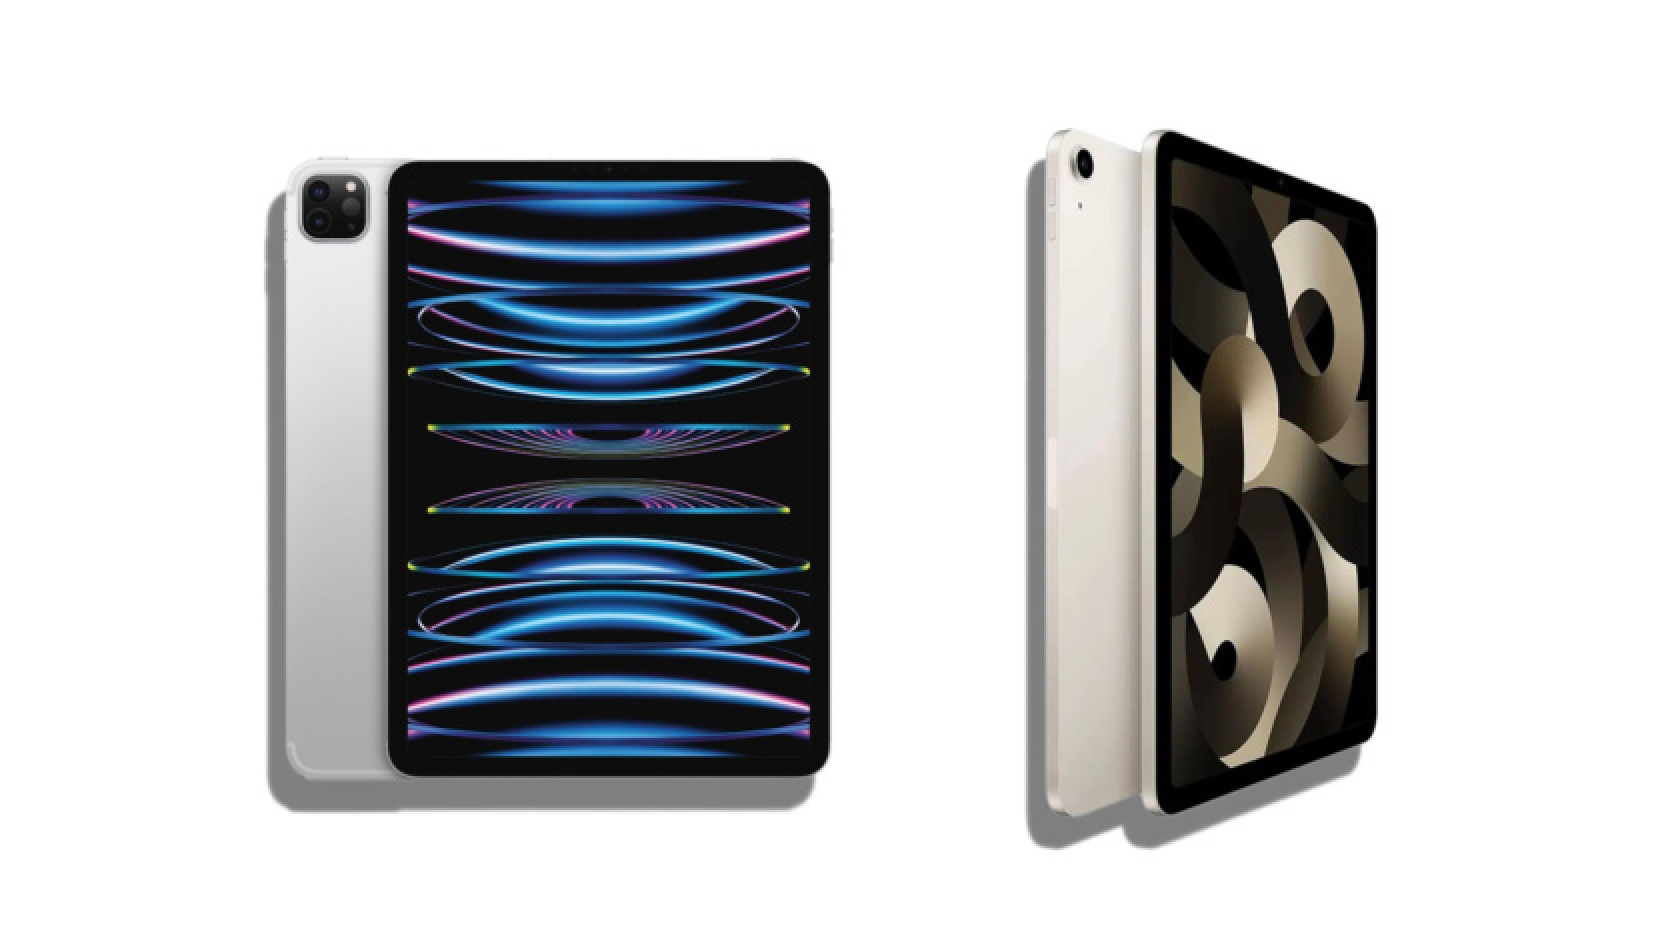 Gourmet: the new iPad Pro and iPad Air will be released the week of May 6. Prices for the Pro are likely to increase